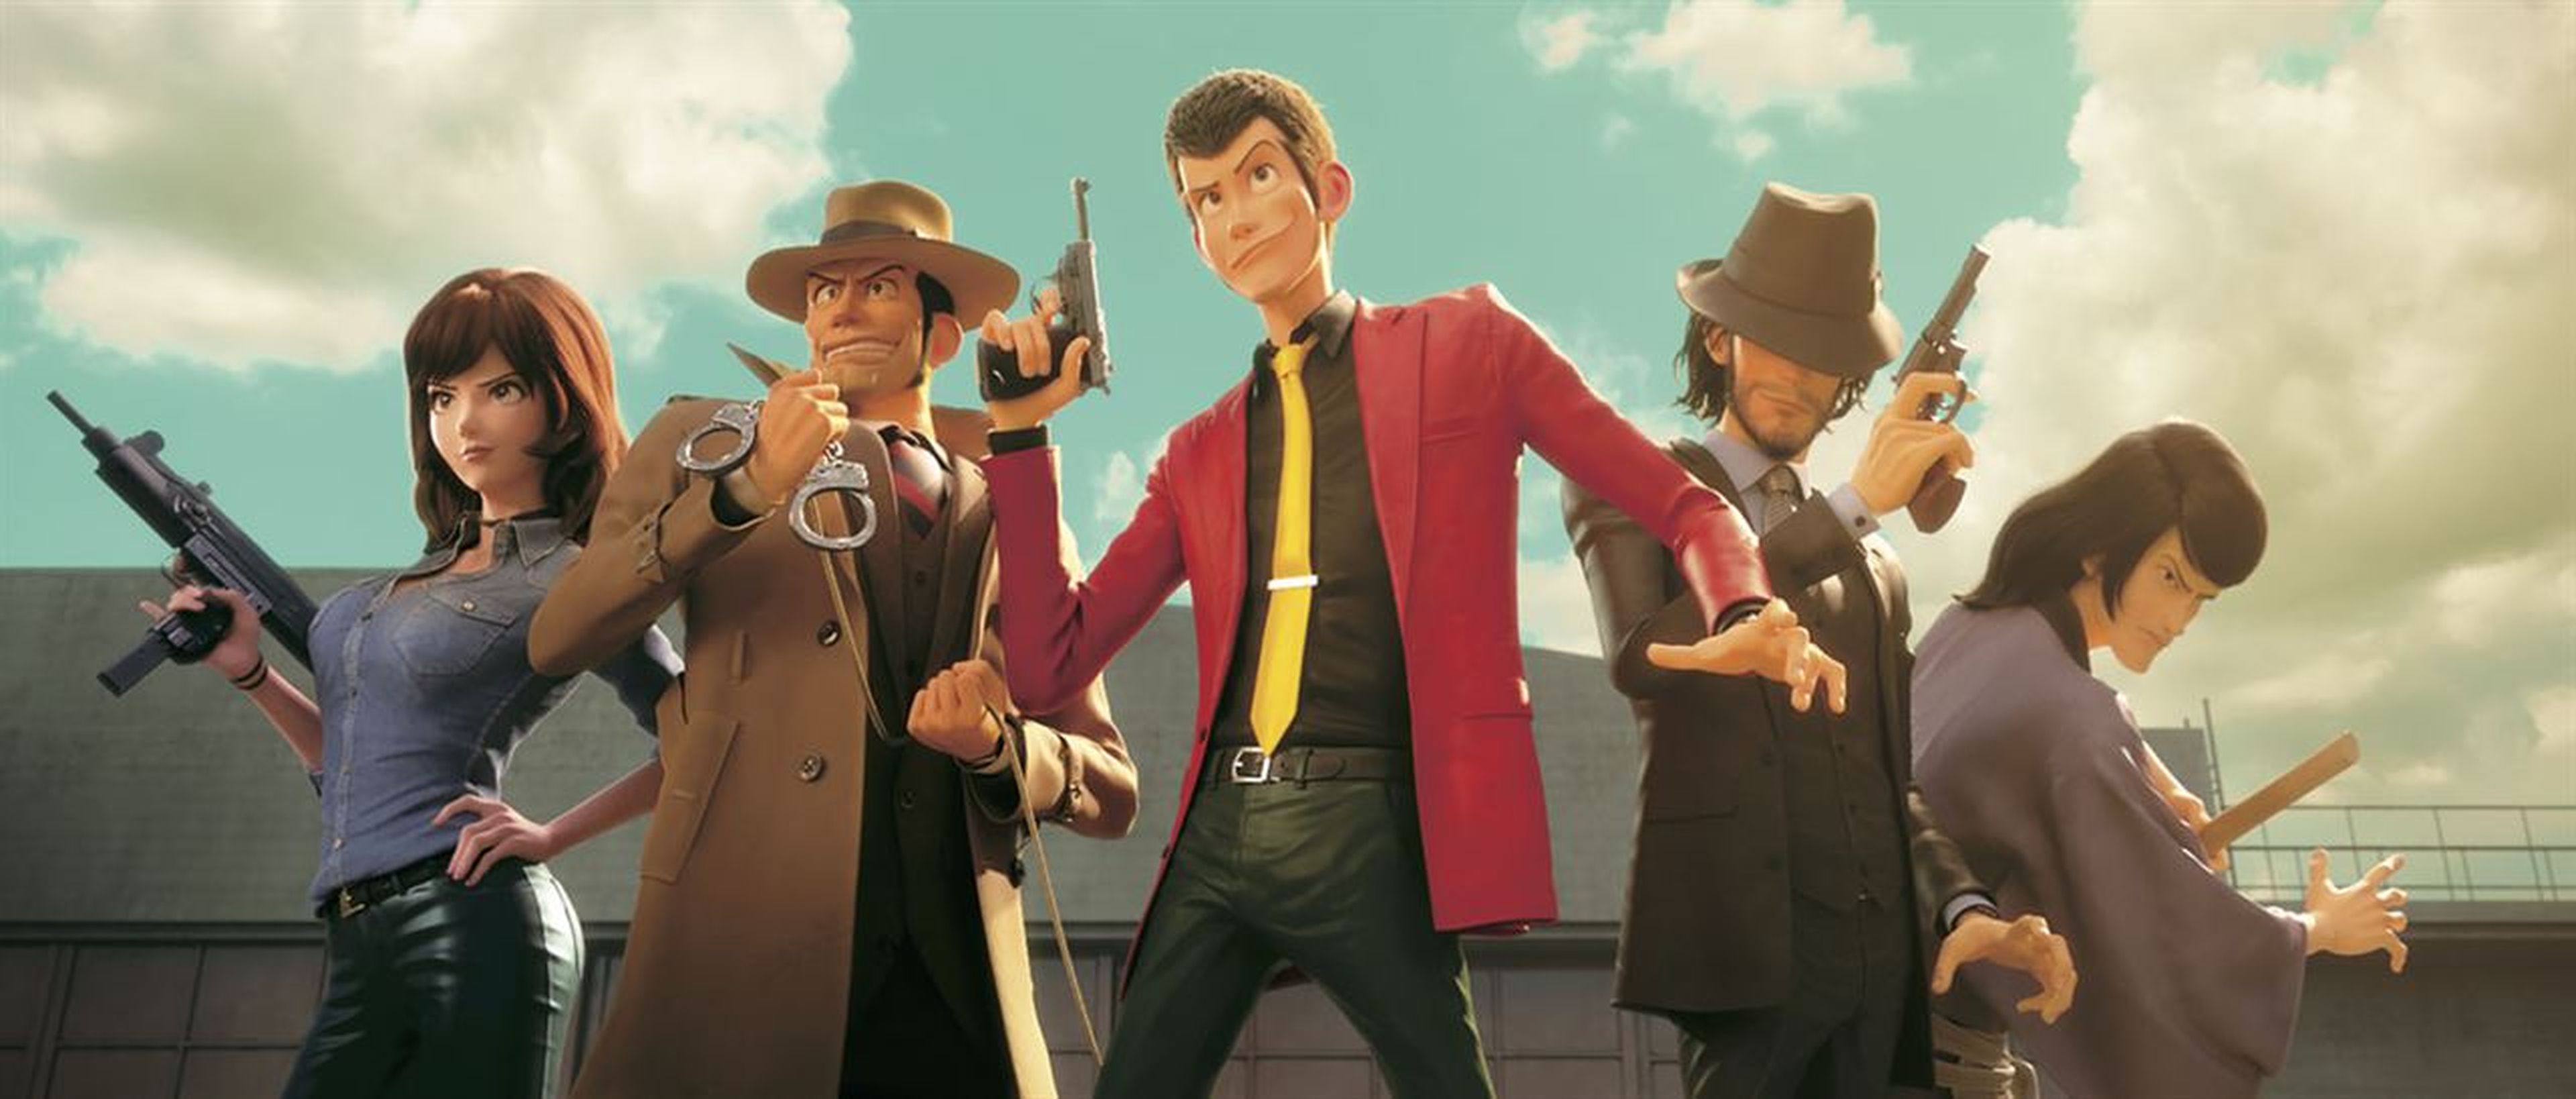 Imágenes Lupin III The First